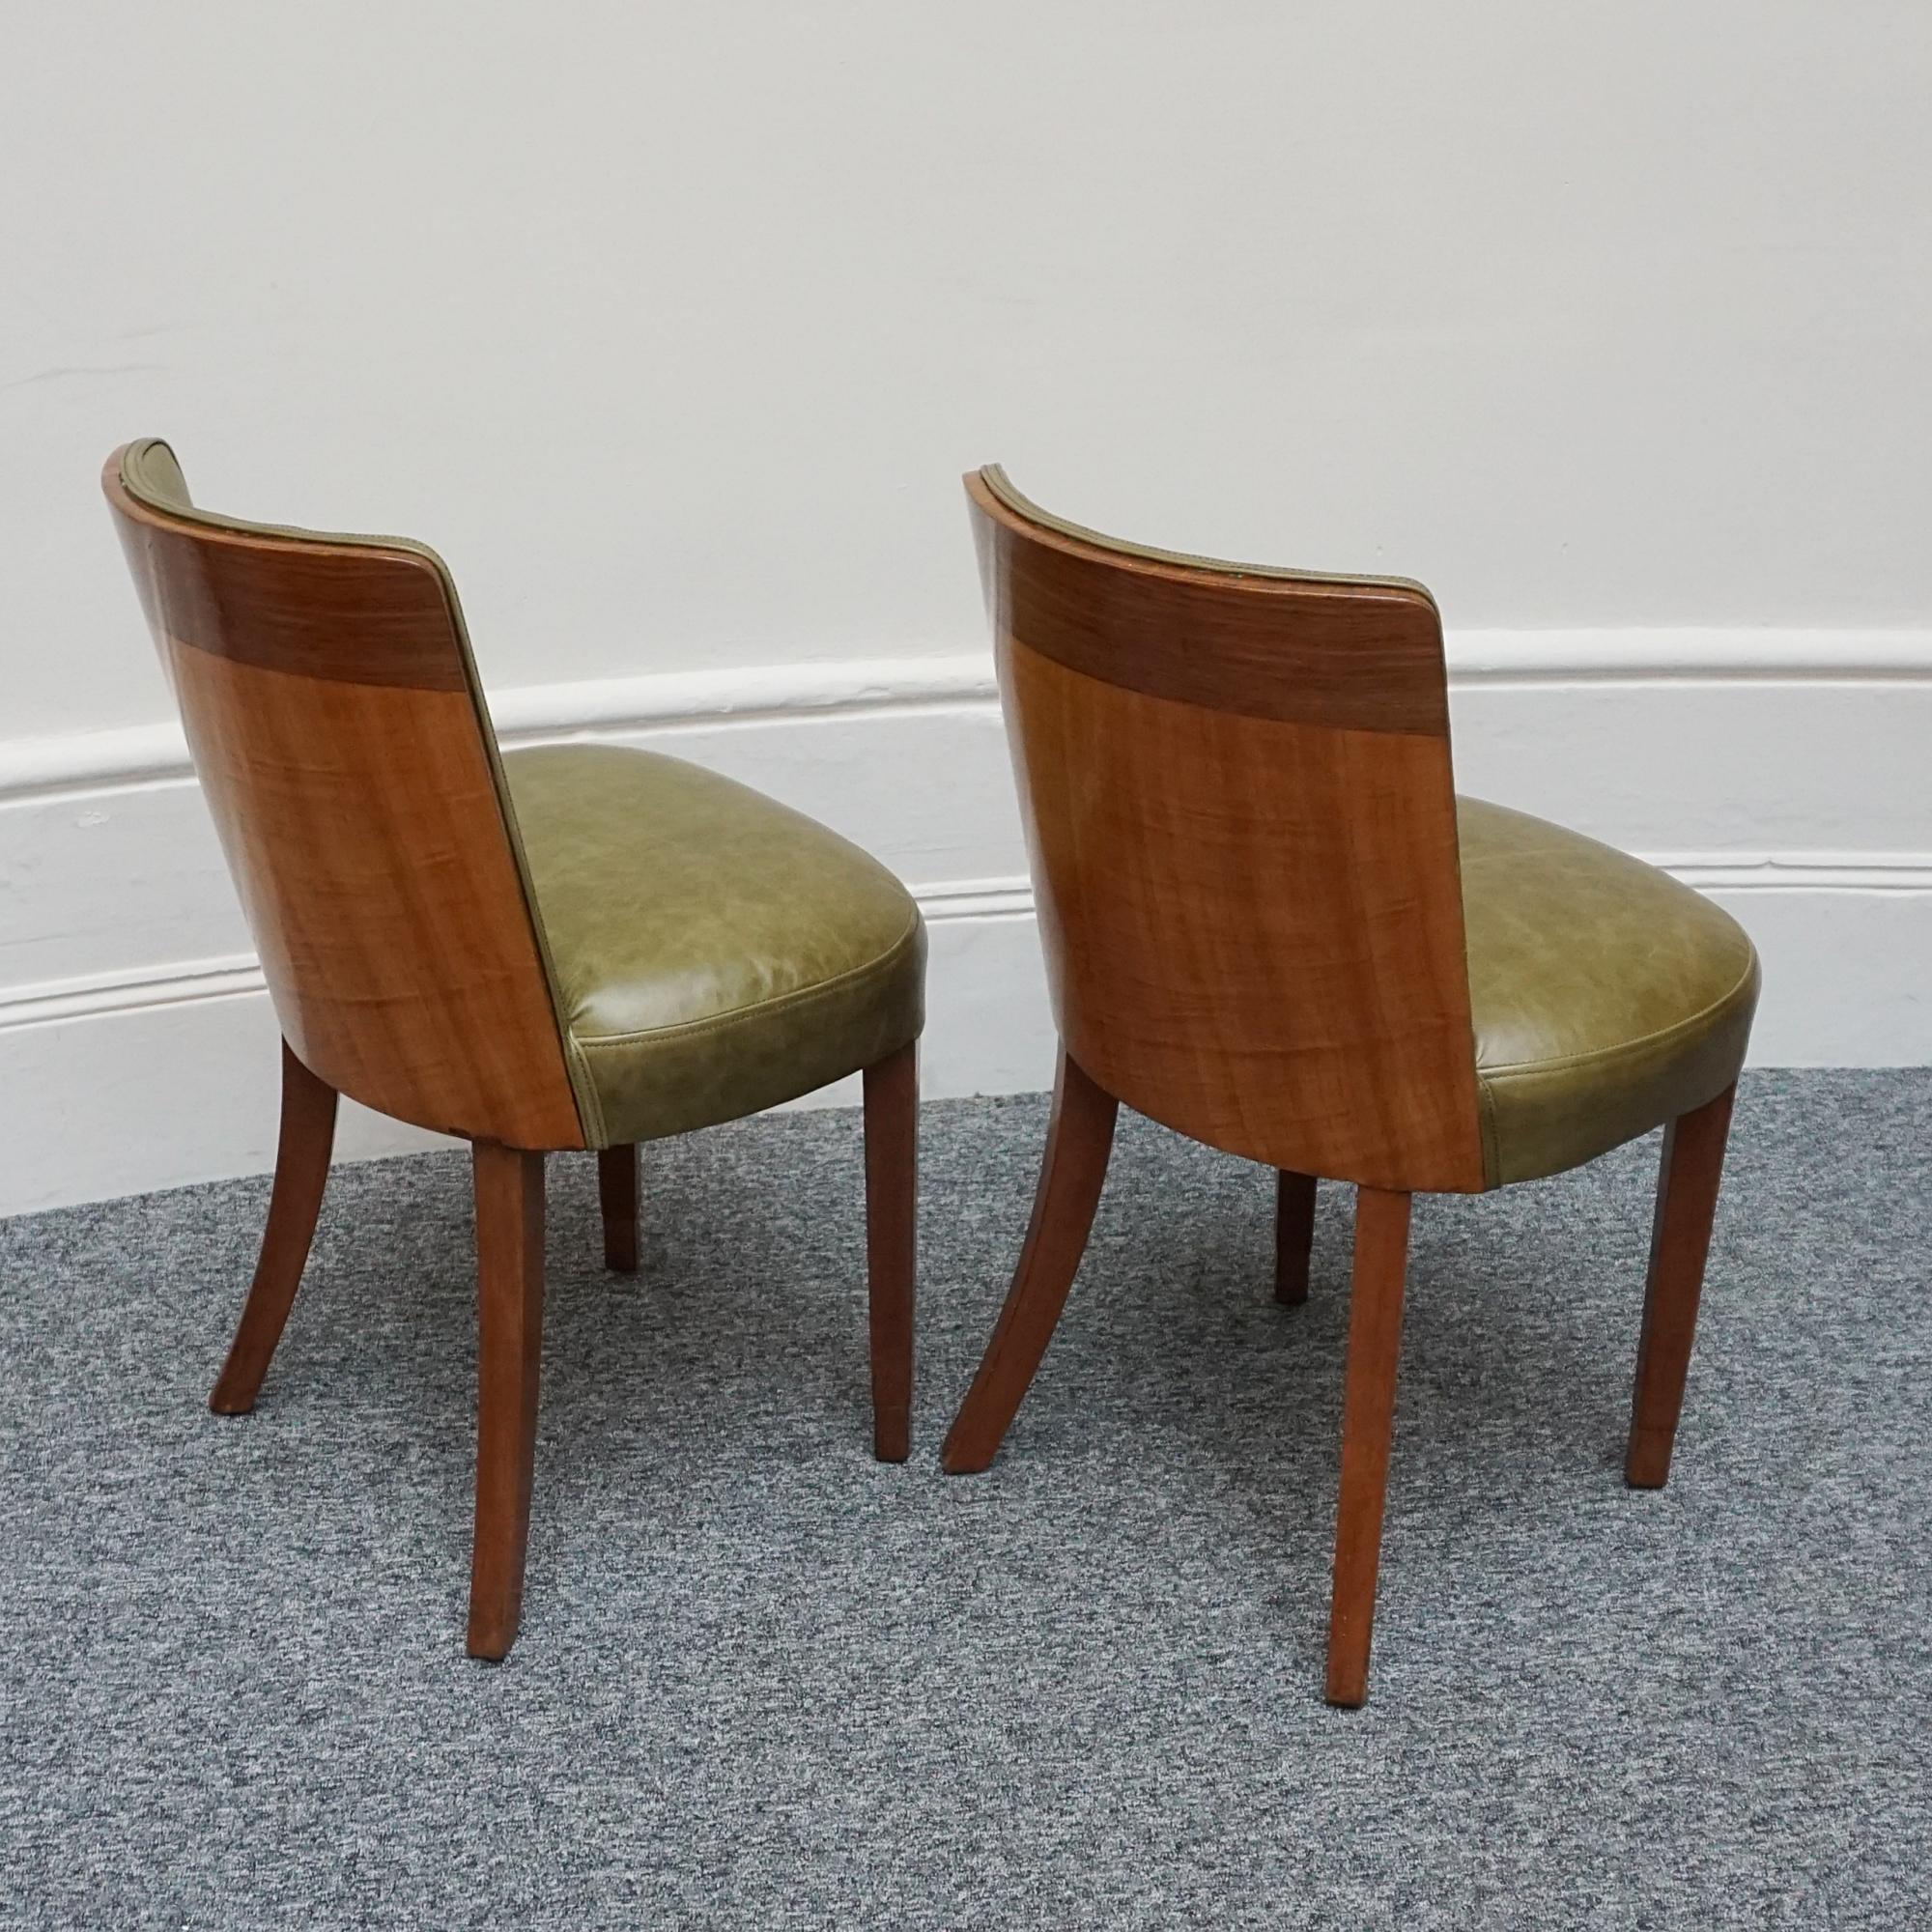 Early 20th Century Pair of Figured Walnut Veneered Art Deco Side Chairs Green Leather Upholstery